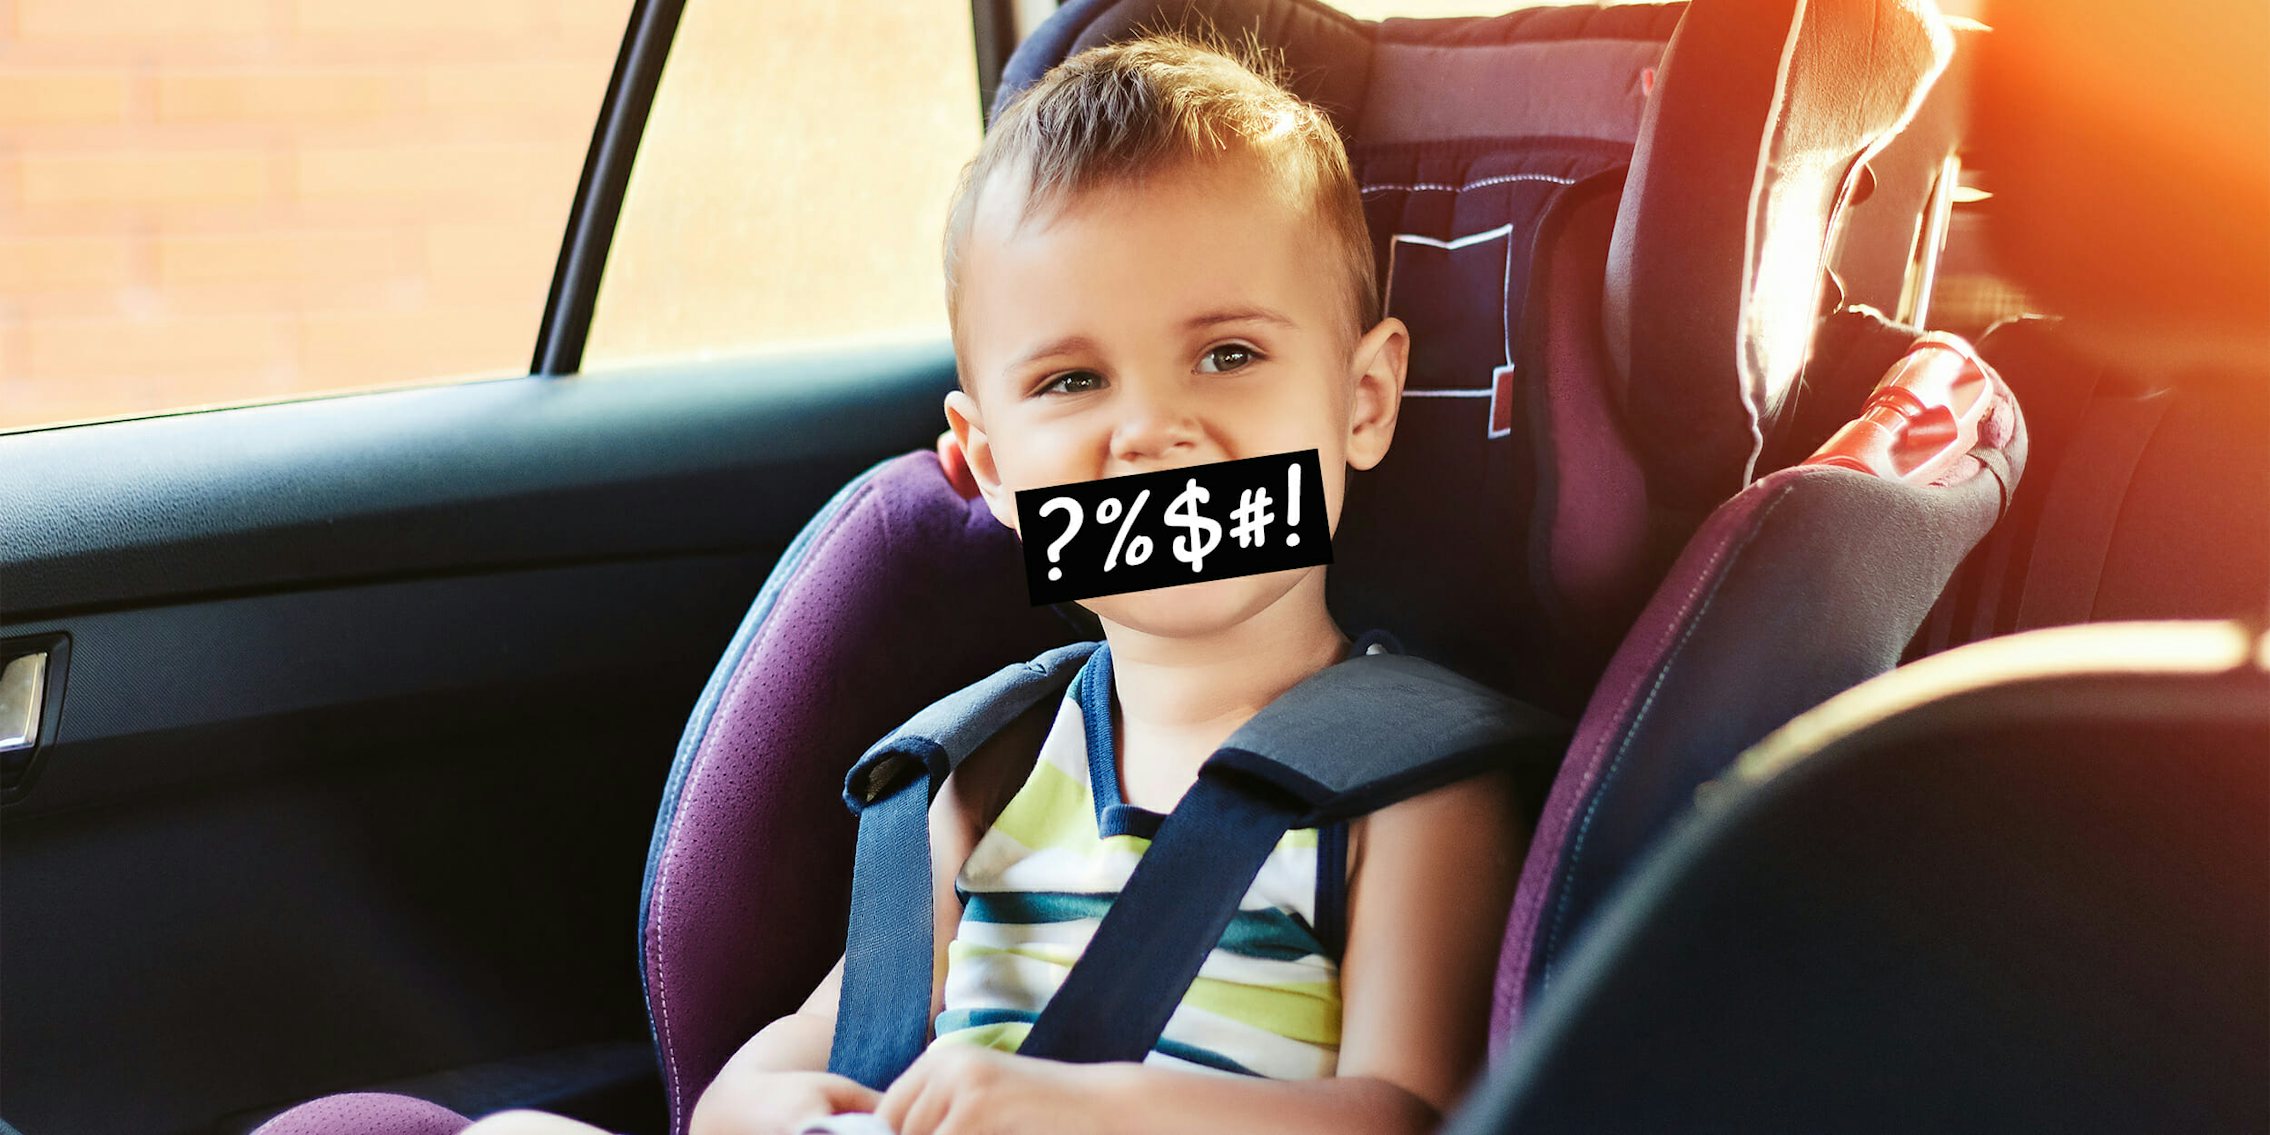 Child in car seat with censor bar covering mouth